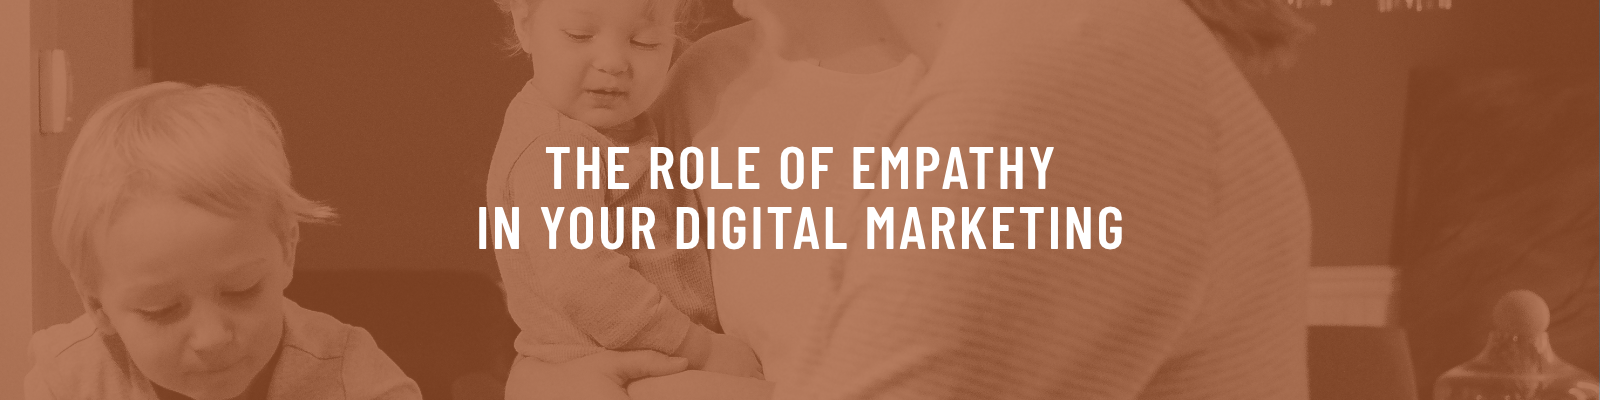 The Role of Empathy in Your Digital Marketing 